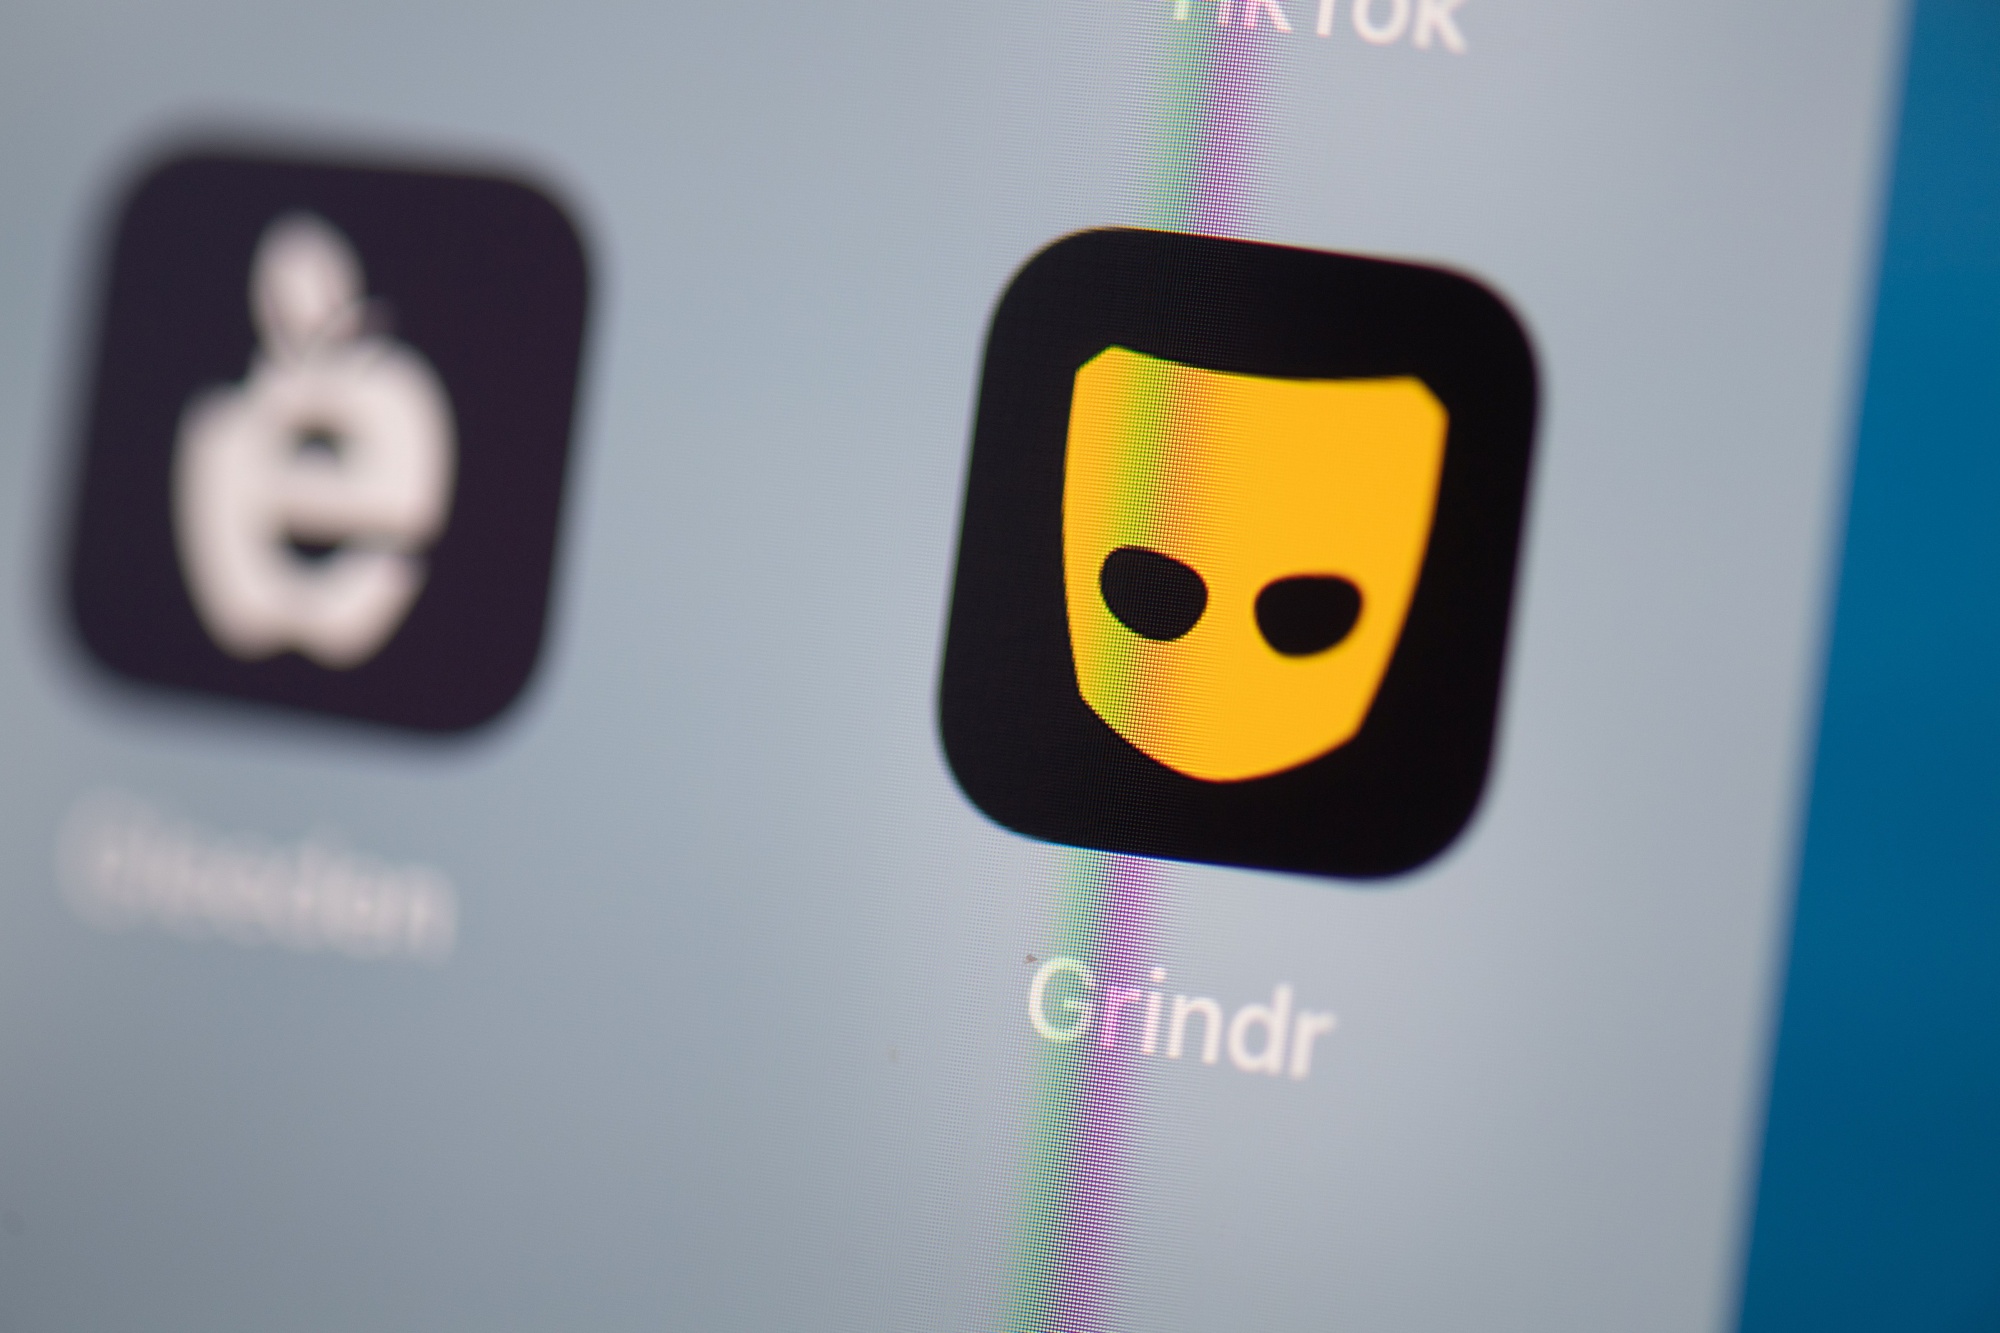 Grindr how to payment cancel Deleting Grindr